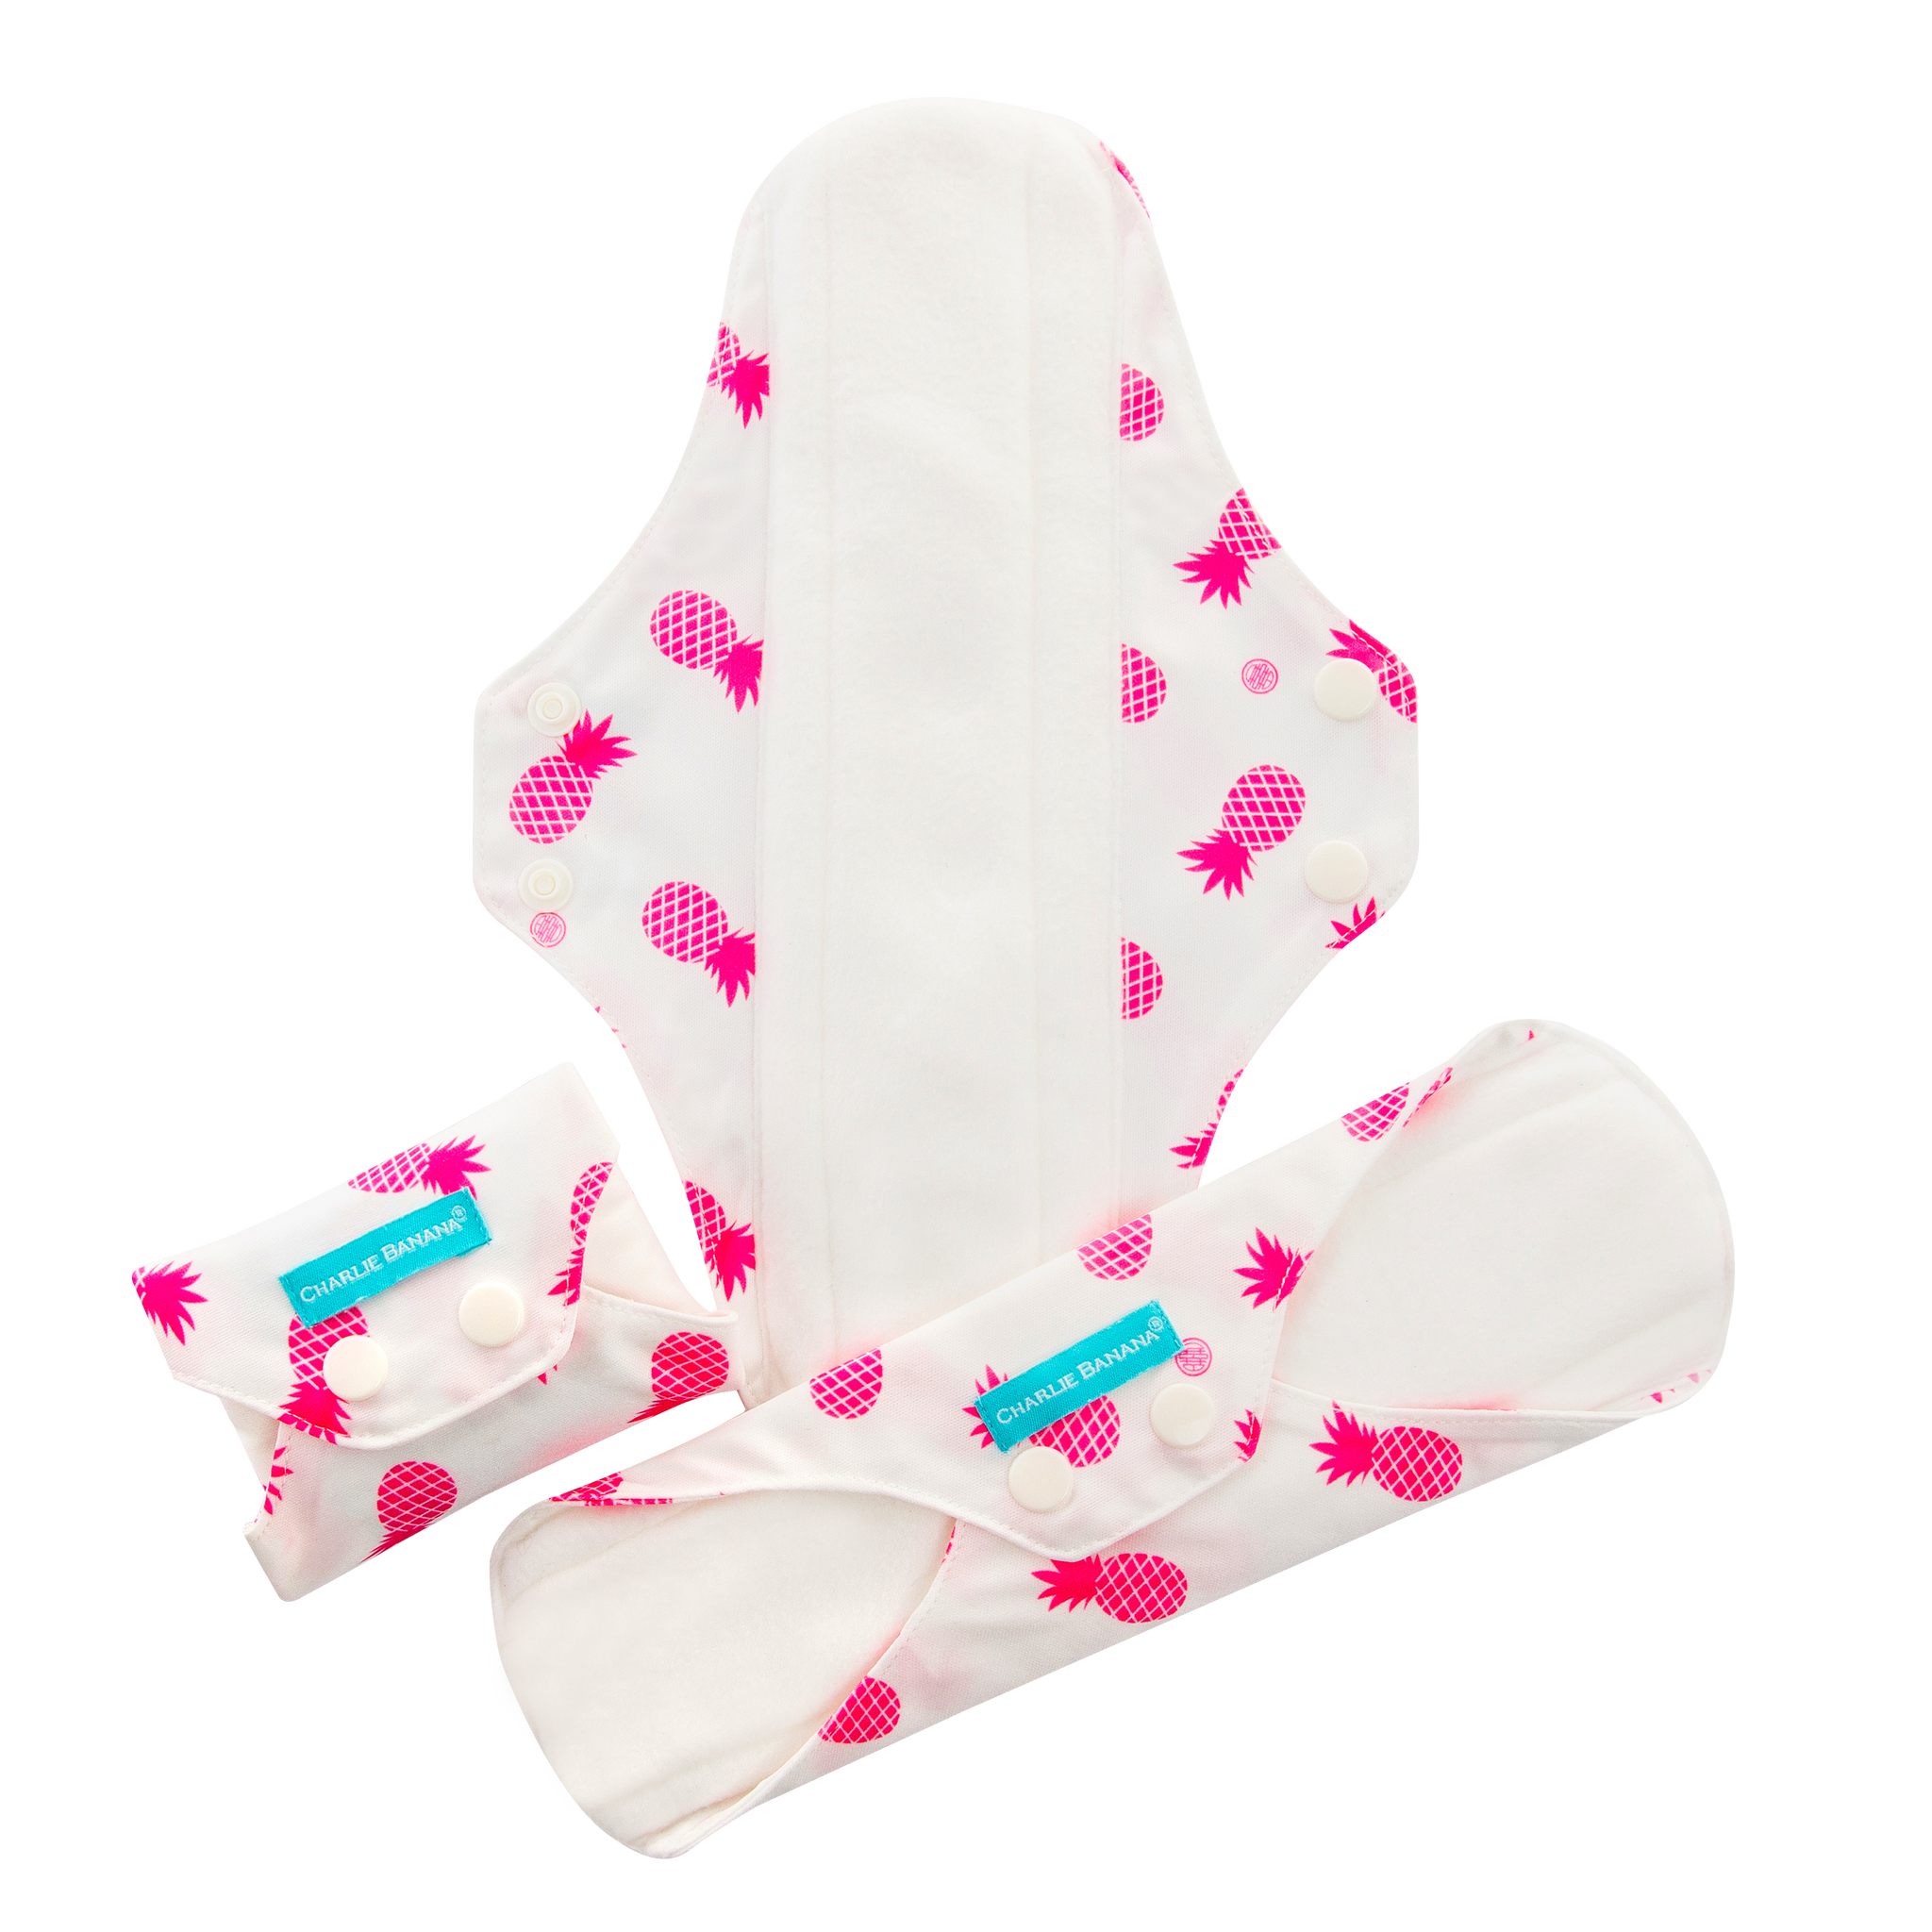 white and pink pineapples pads .פד רב פעמי למחזורThe remarkable pad that absorbs more than any cup or undies can imagine! These miracle pads have a superb absorbency of up to 120 ml (that’s one whole average period) with the power to leave you dry and comfortable throughout the day. Soft, simple, easy, convenient, safe while delivering you maximum comfort.